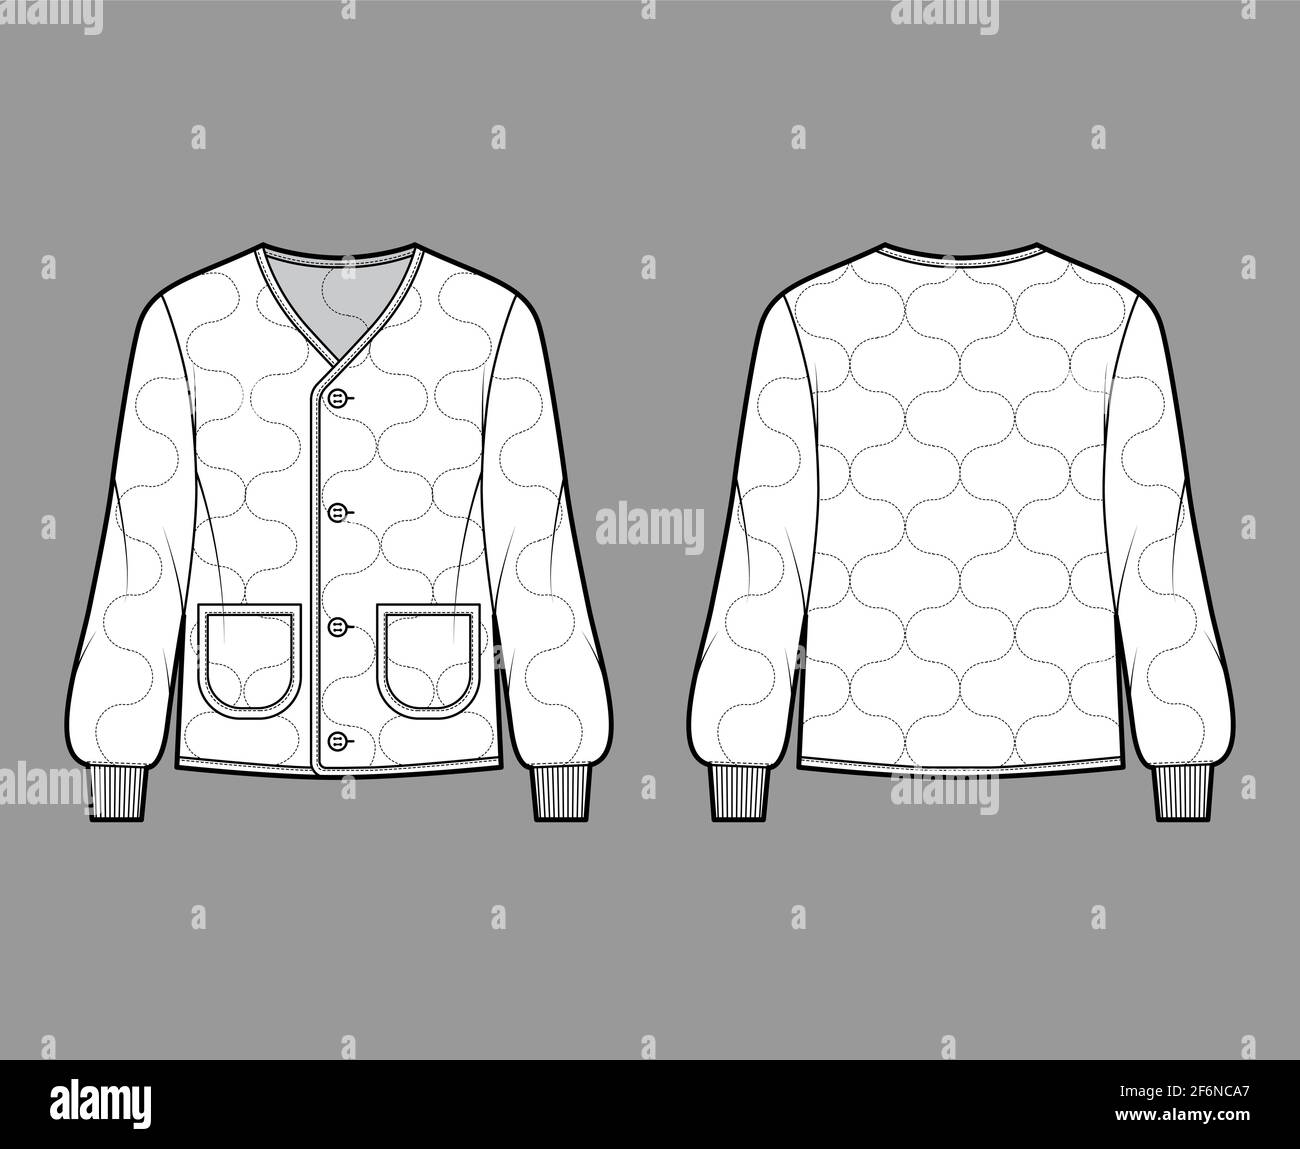 ALS 92 field jacket liner technical fashion illustration with oversized, long sleeves, pockets, Onion quilted shell. Flat coat template front, back white color style. Women men unisex top CAD mockup Stock Vector